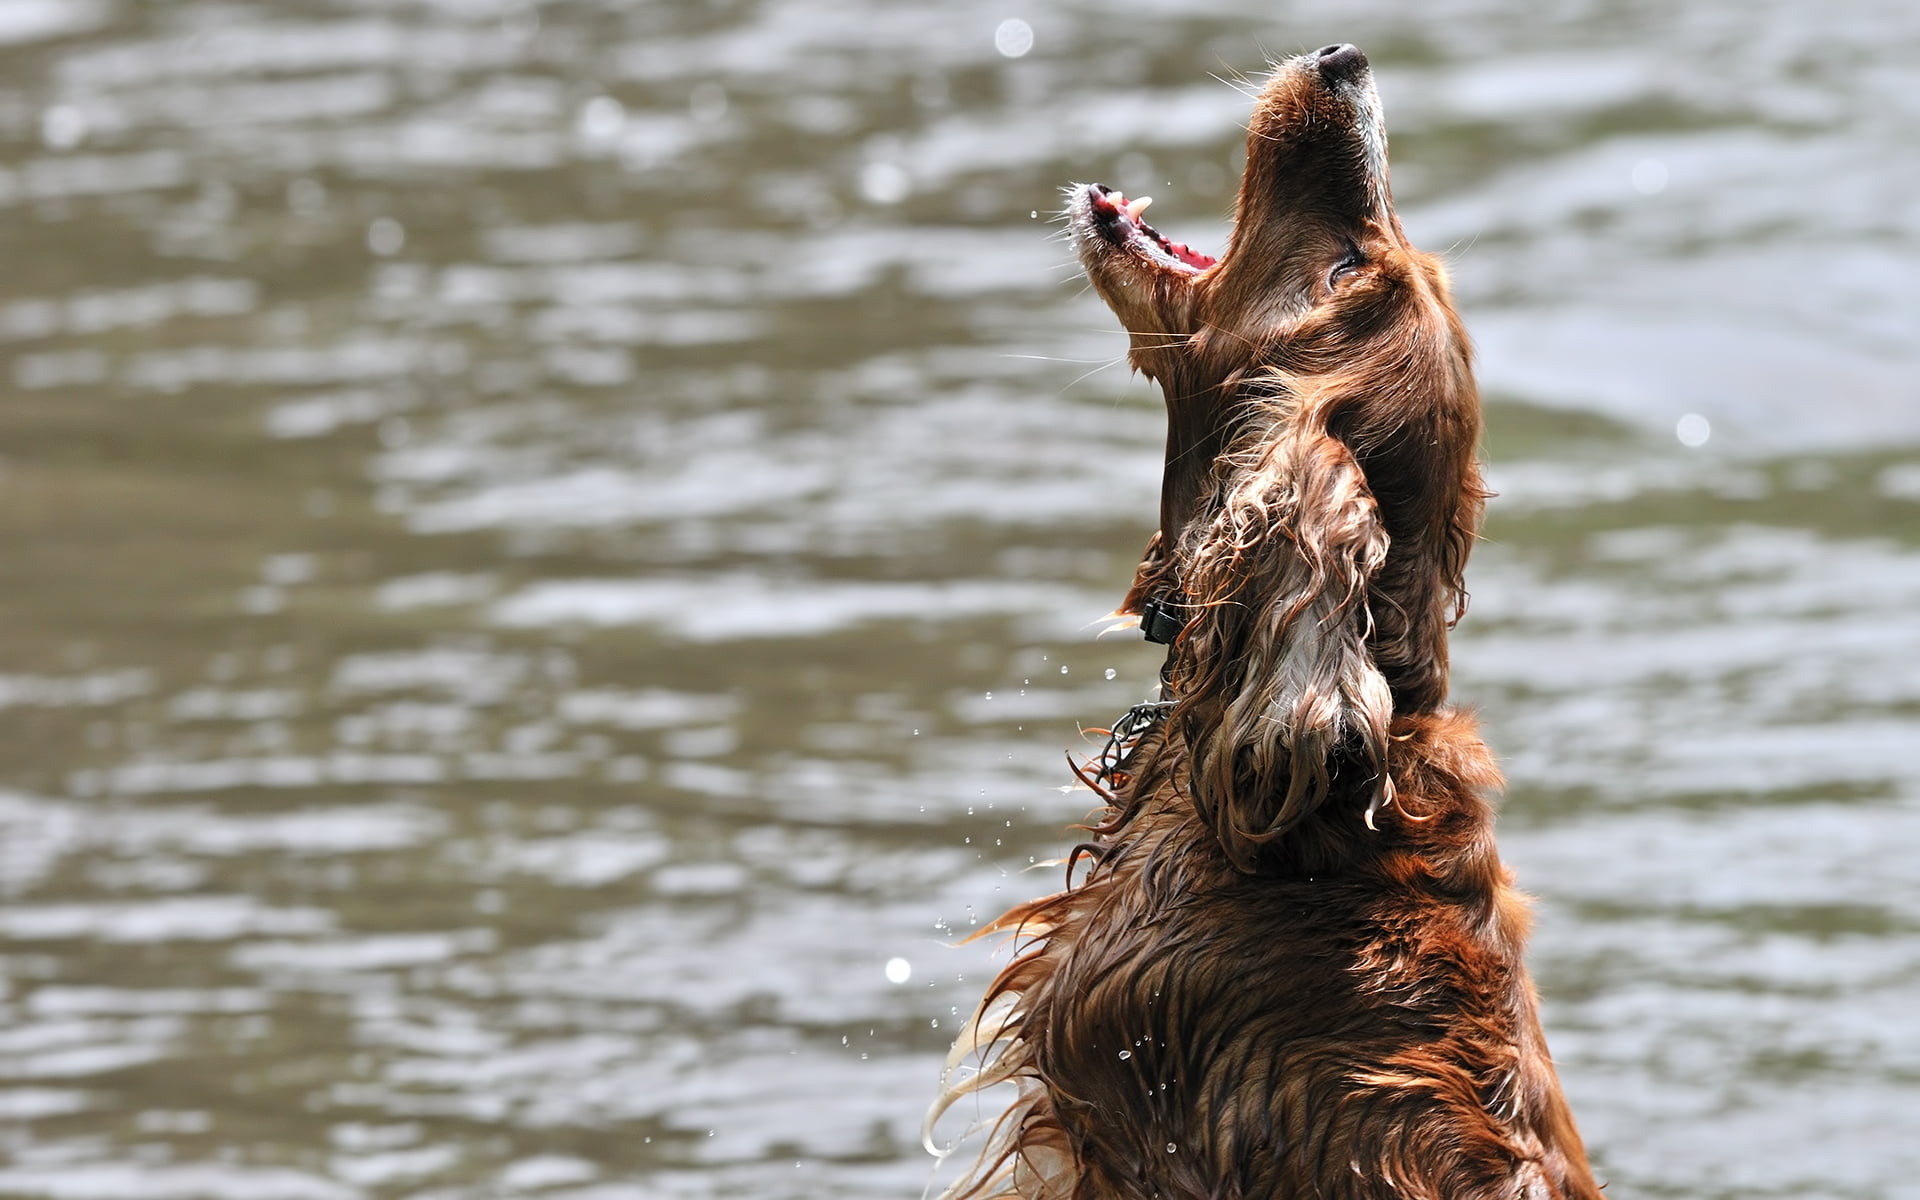 tan spaniel howling on water during daytime photo